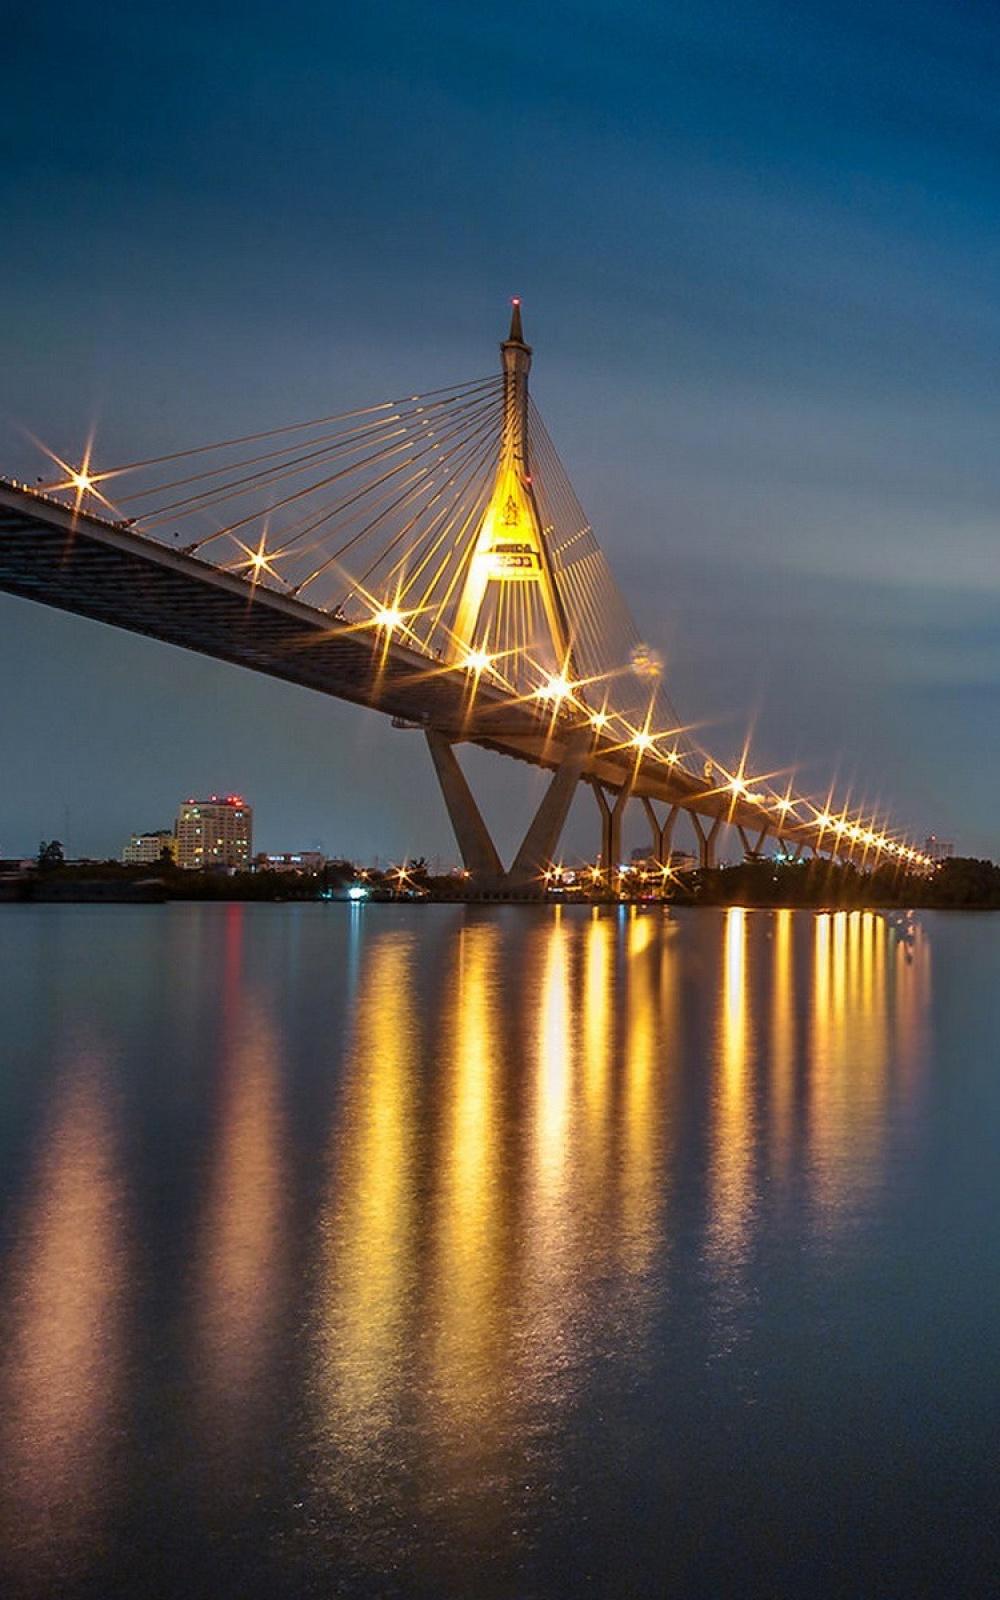 Light Reflection Bridge At Night Android Wallpaper free download